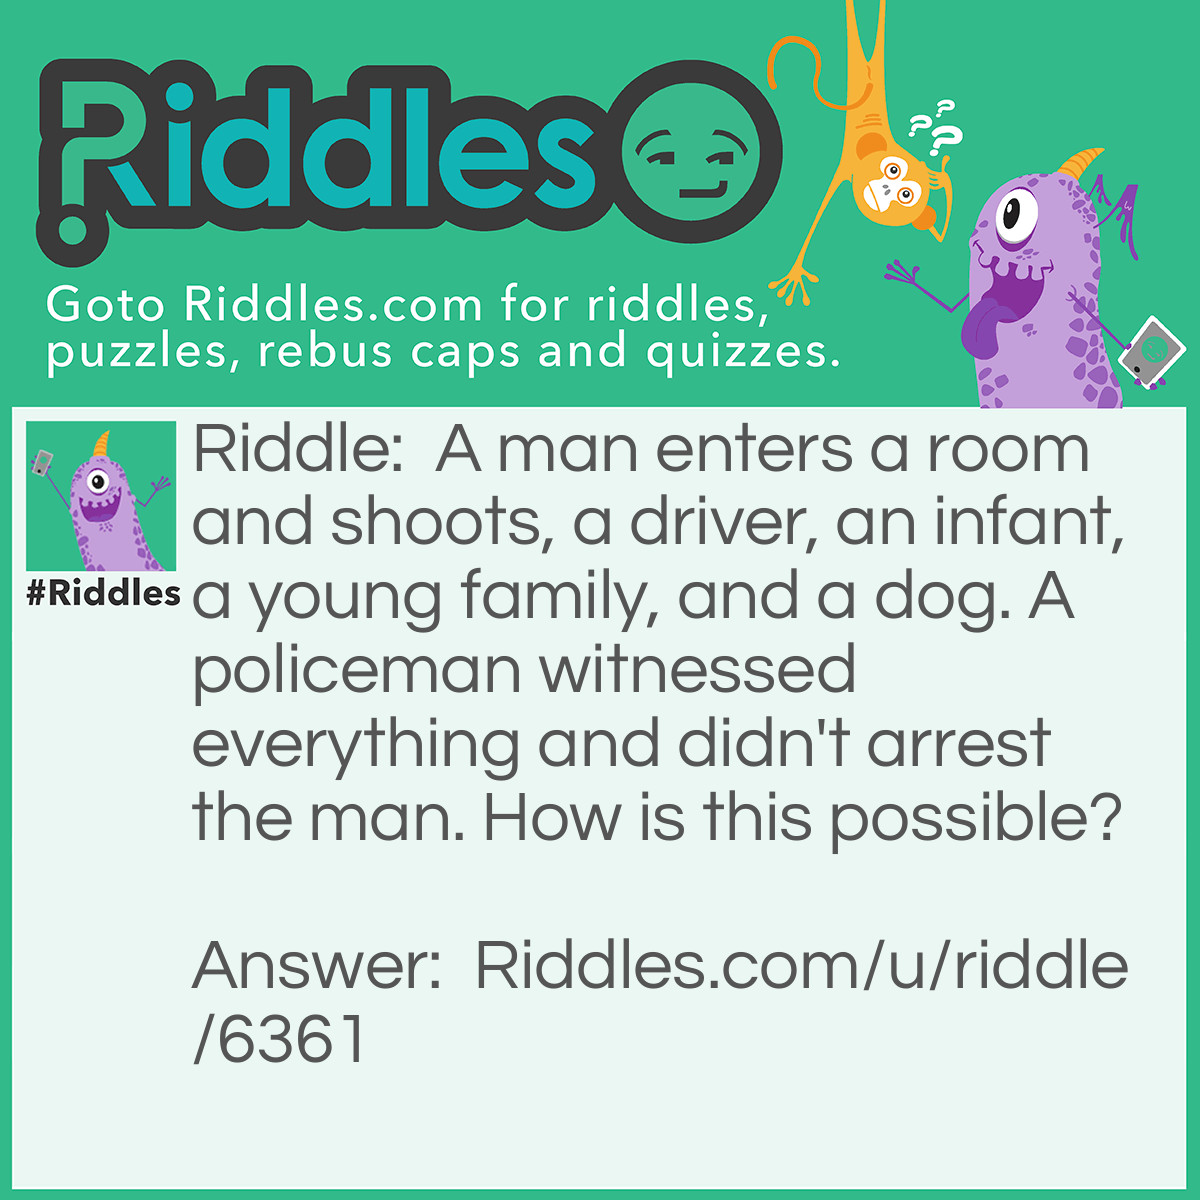 Riddle: A man enters a room and shoots, a driver, an infant, a young family, and a dog. A policeman witnessed everything and didn't arrest the man. How is this possible? Answer: The Man is a Photographer.